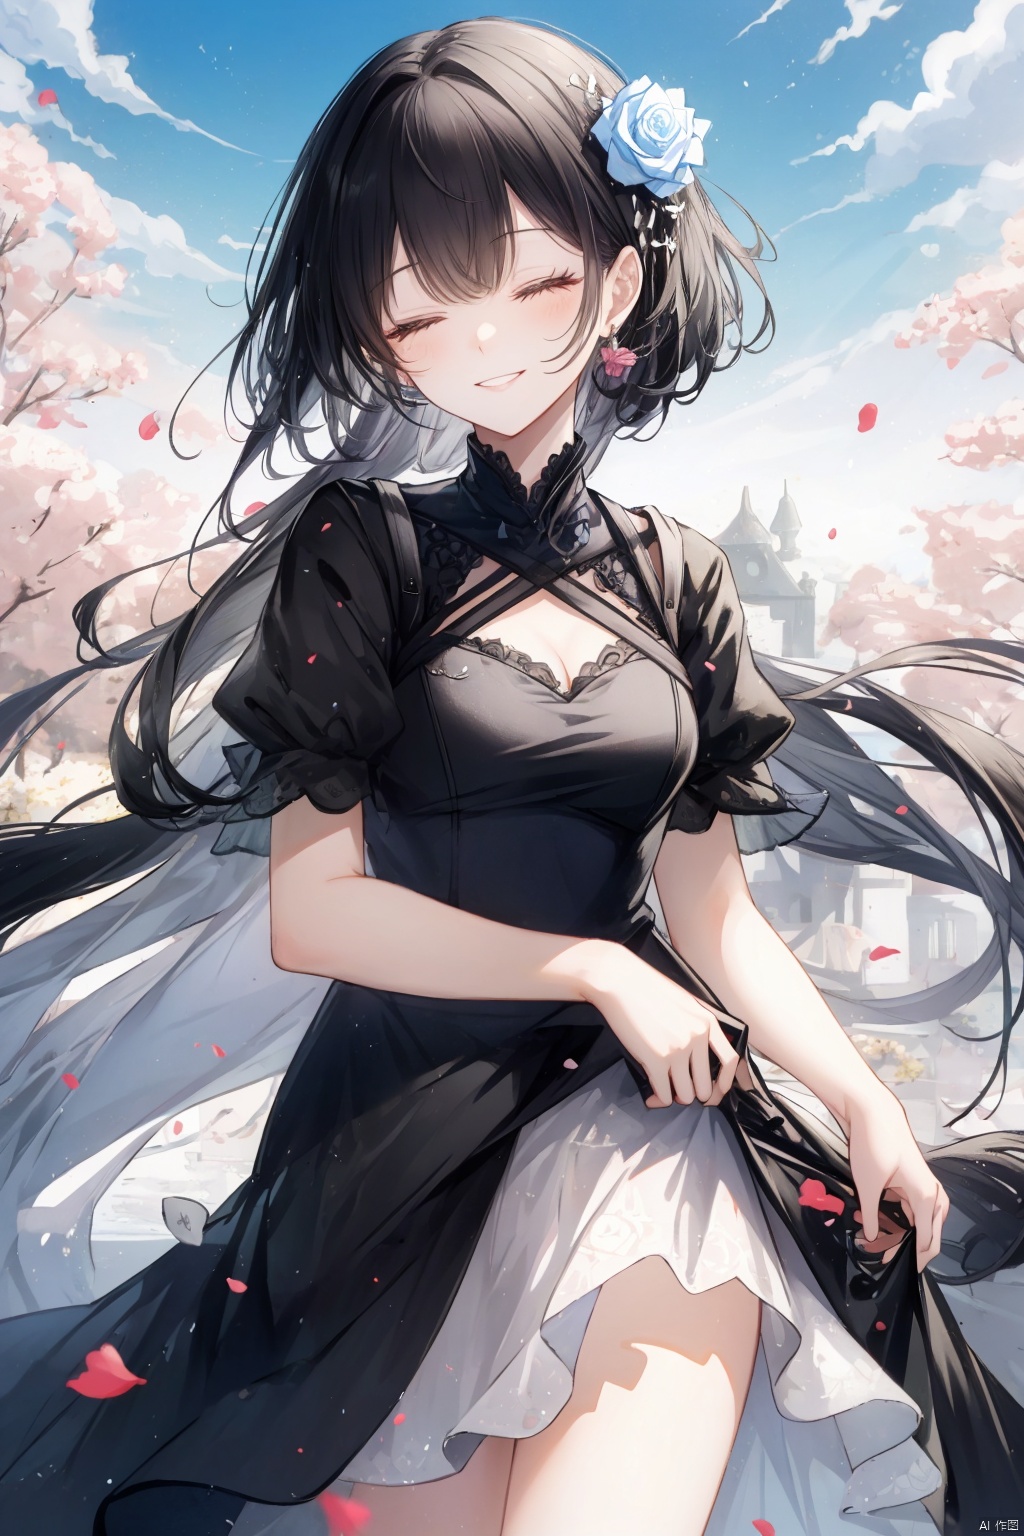 A serene outdoor scene unfolds as a girl with long, raven-black locks and a bright smile stands alone, her eyes closed in peaceful contemplation. She wears a dress with short sleeves and a floral print that catches the eye, adorned with a delicate pink rose tucked behind her ear. The sky above is a brilliant blue, dotted with puffy white clouds, as she tilts her head and cradles the remaining rose bloom against her palm.